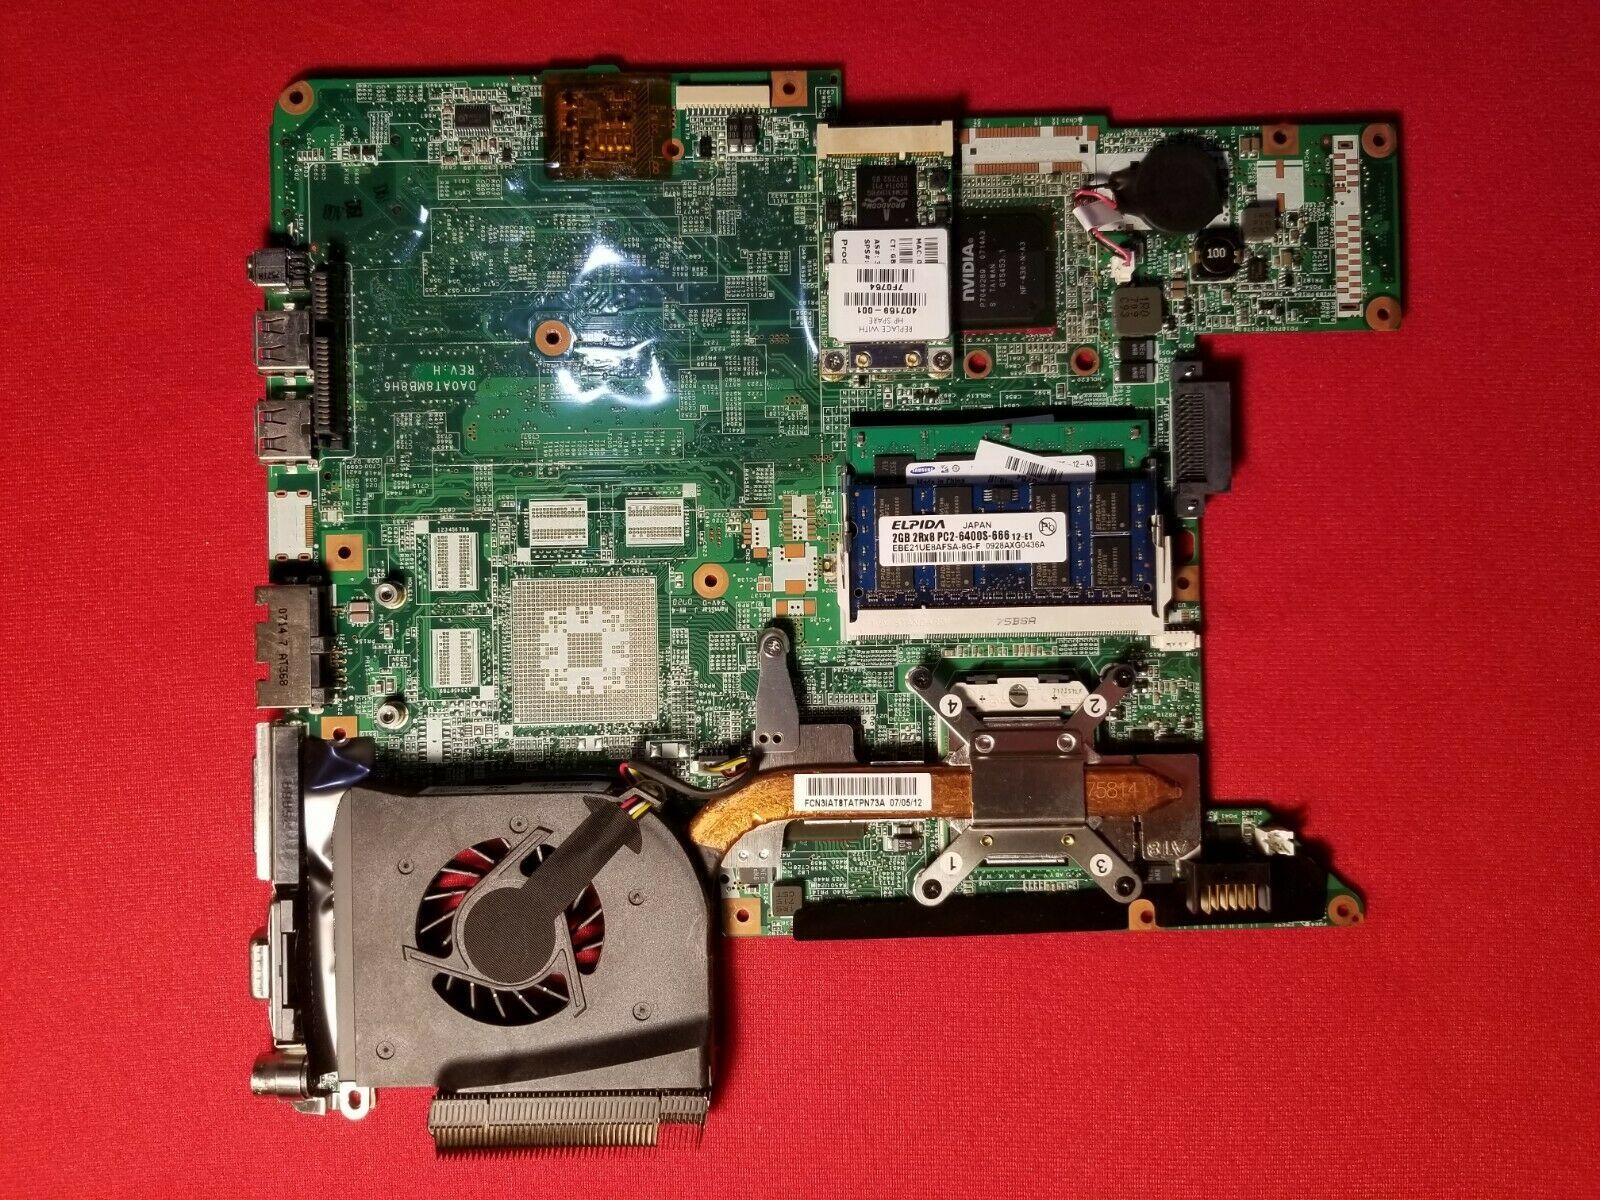 HP Pavilion DV6000-dv6308nr Laptop AMD 64X2 1.60GHz Motherboard Combo 443775-001 Modified Item: No CPU Bran - Click Image to Close